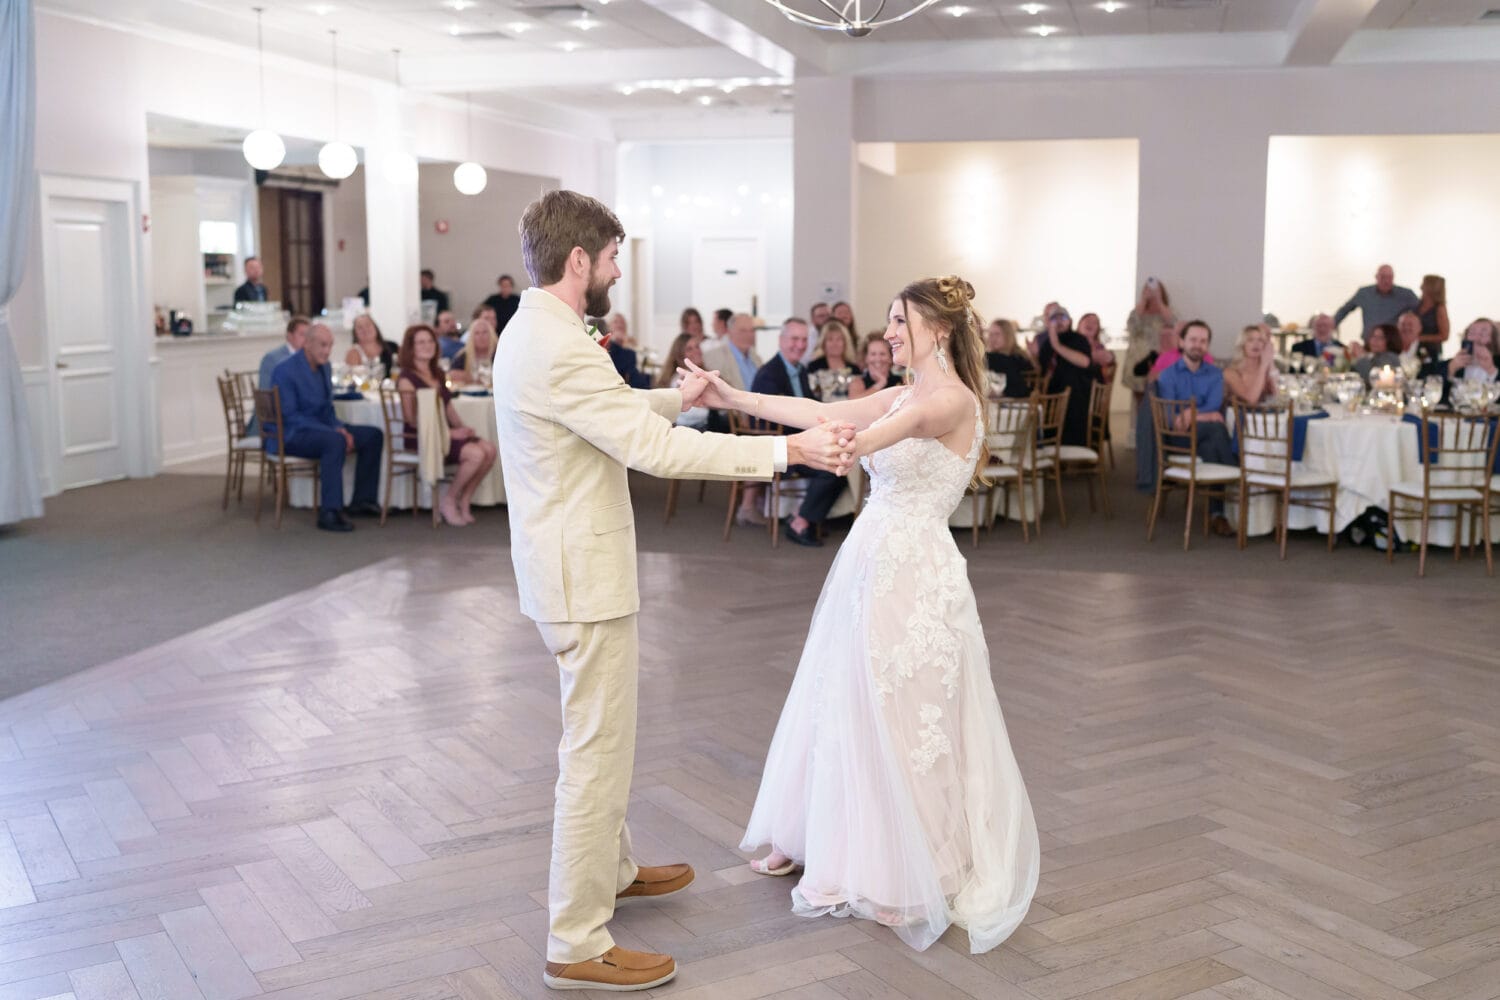 First dance in the ballroom - 21 Main Events - North Myrtle Beach